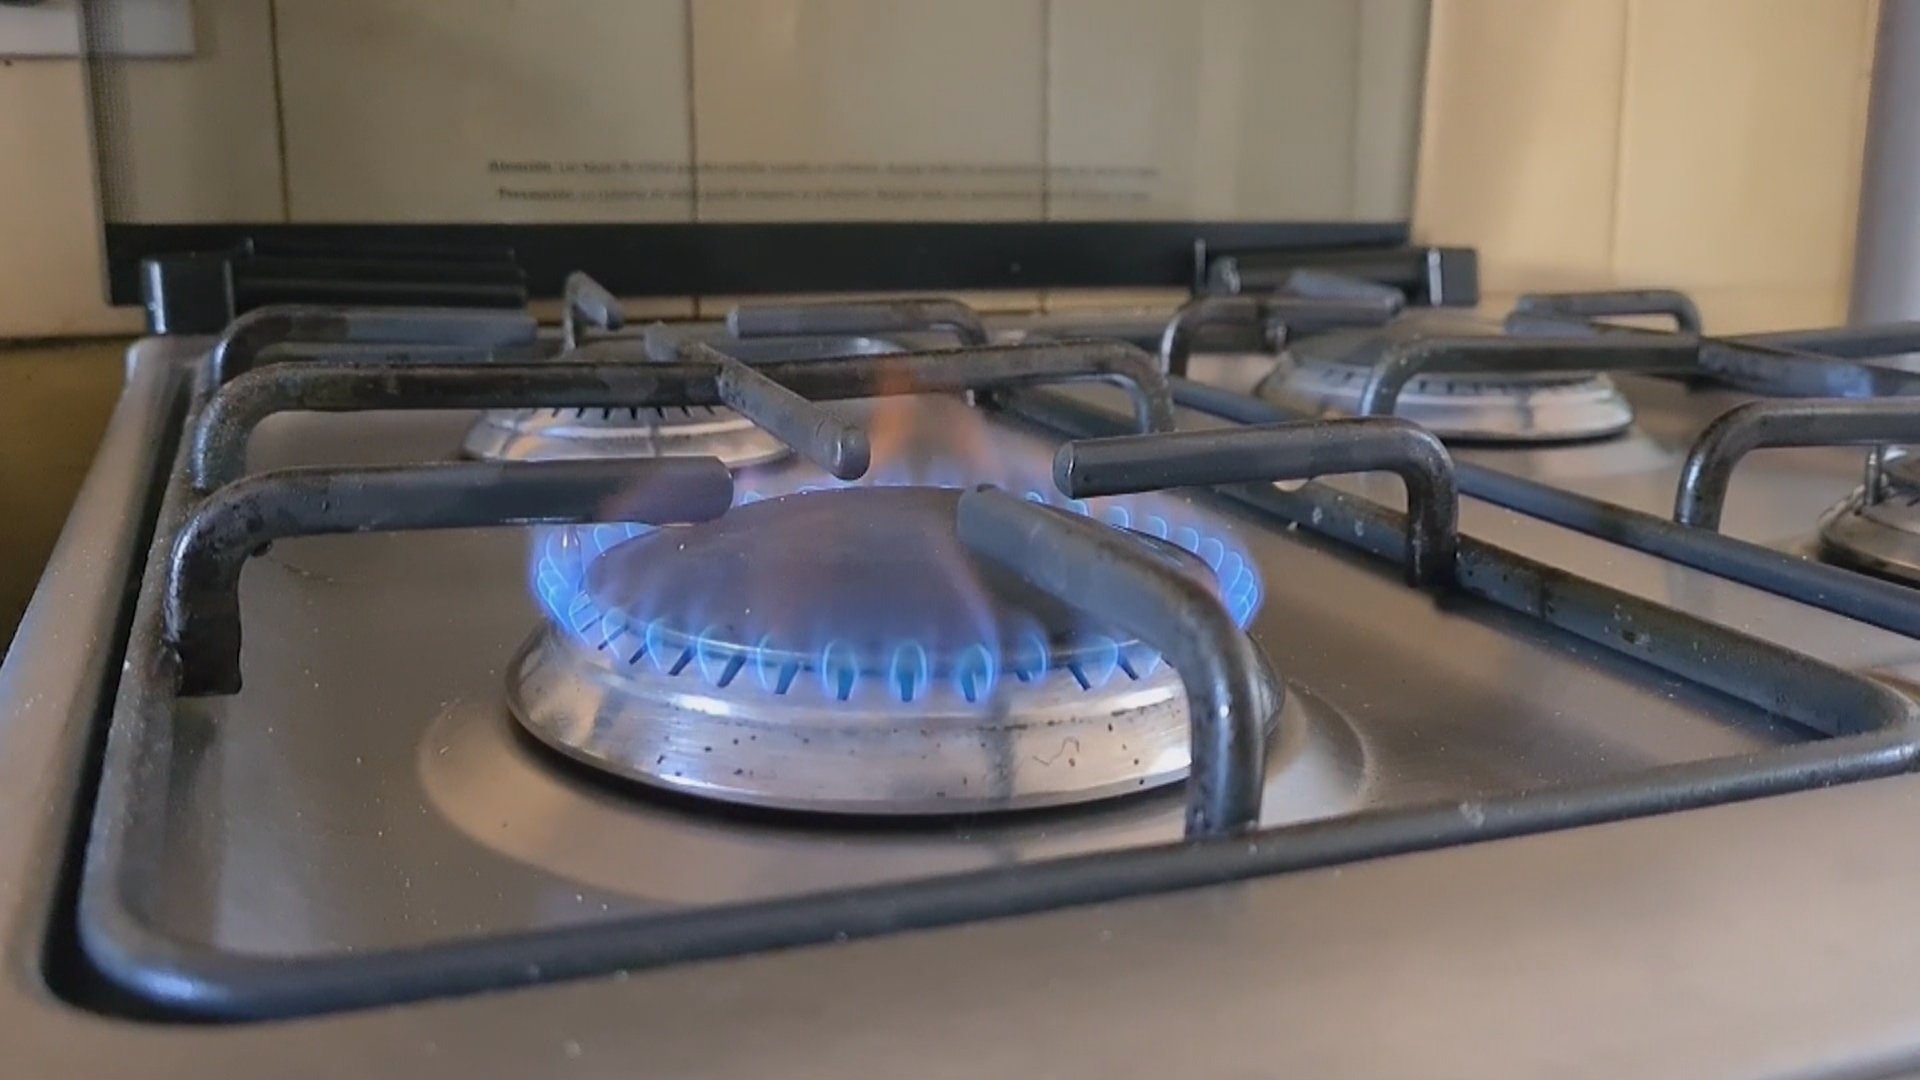 Gas stoves can hurt indoor air quality, consumer advocates say